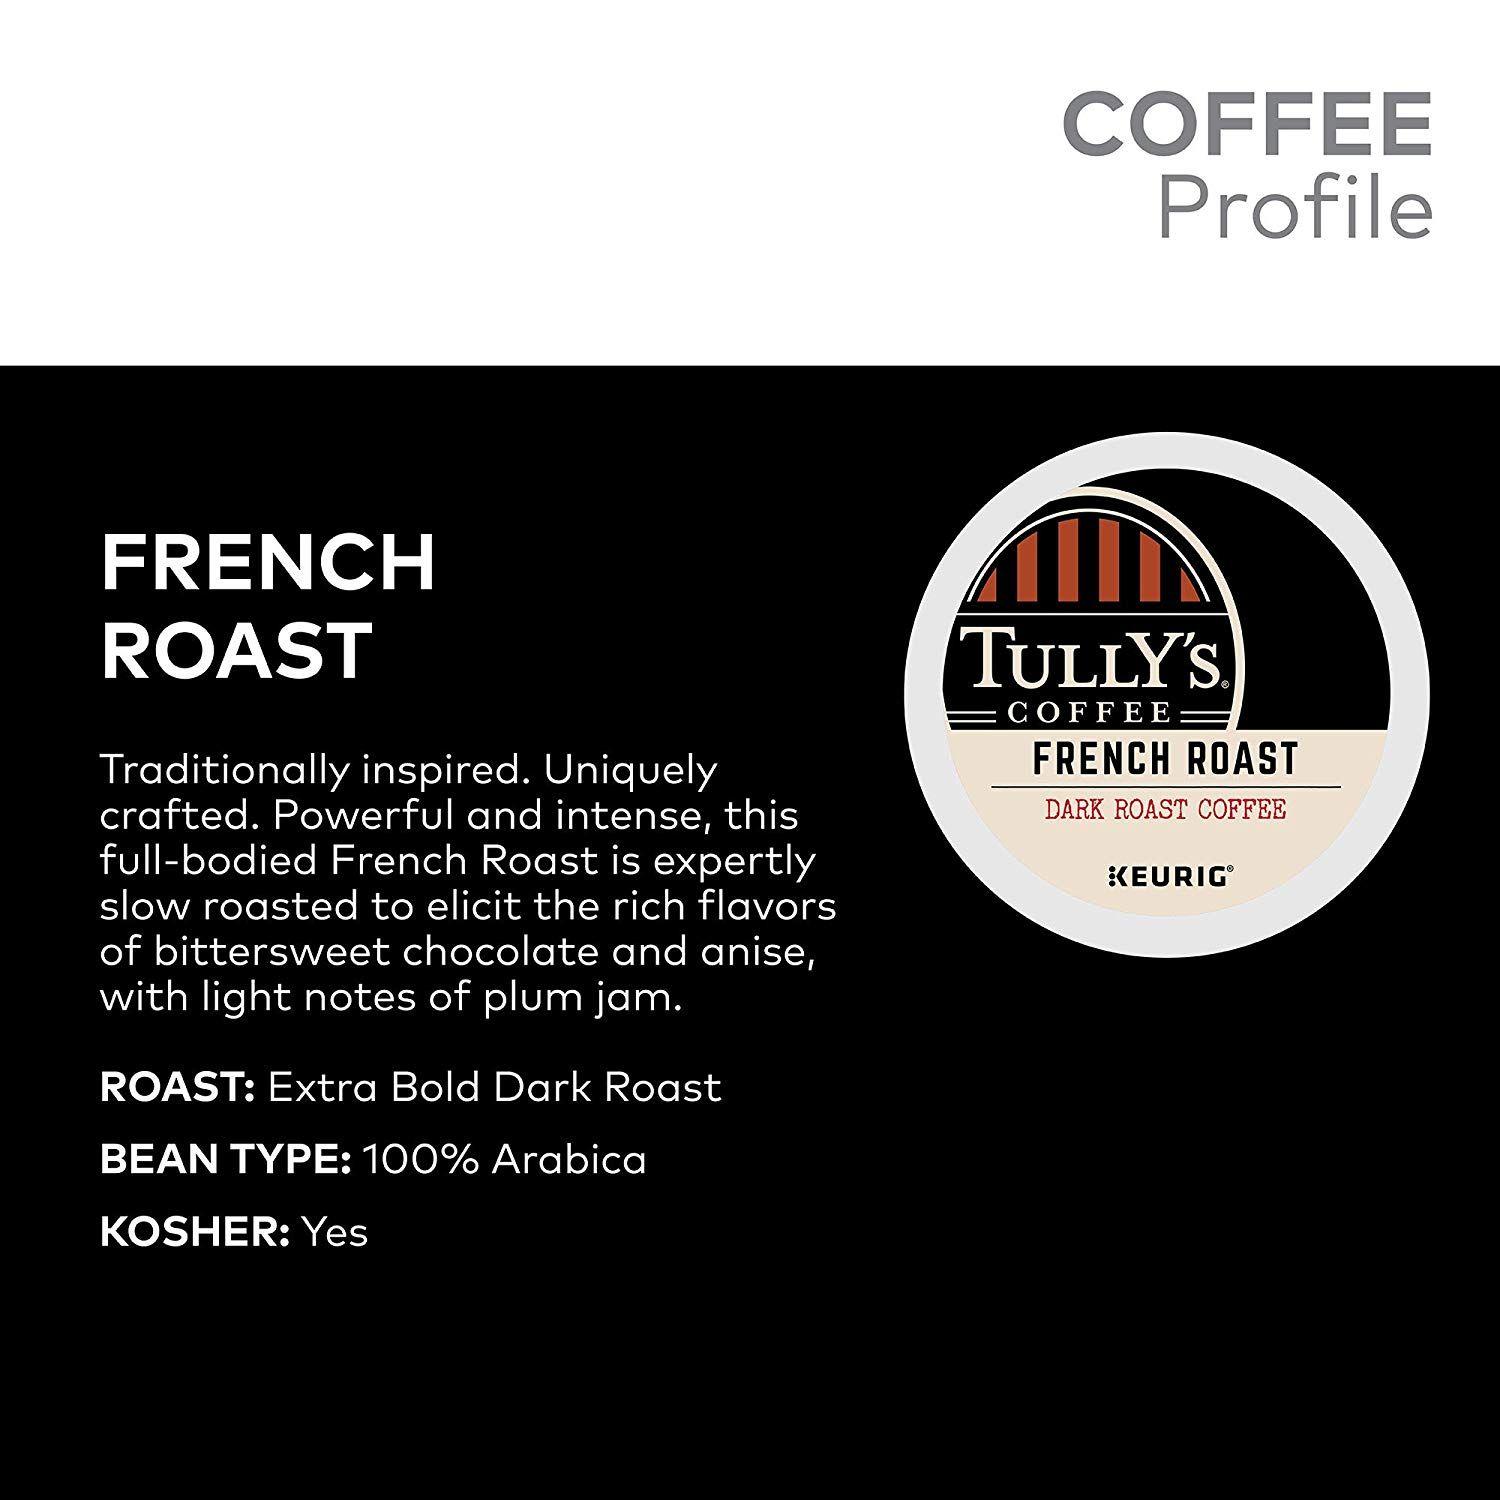 Dark Roast Coffee Brands Logo - Amazon.com : Tully's Coffee House Blend K Cup For Keurig Brewers